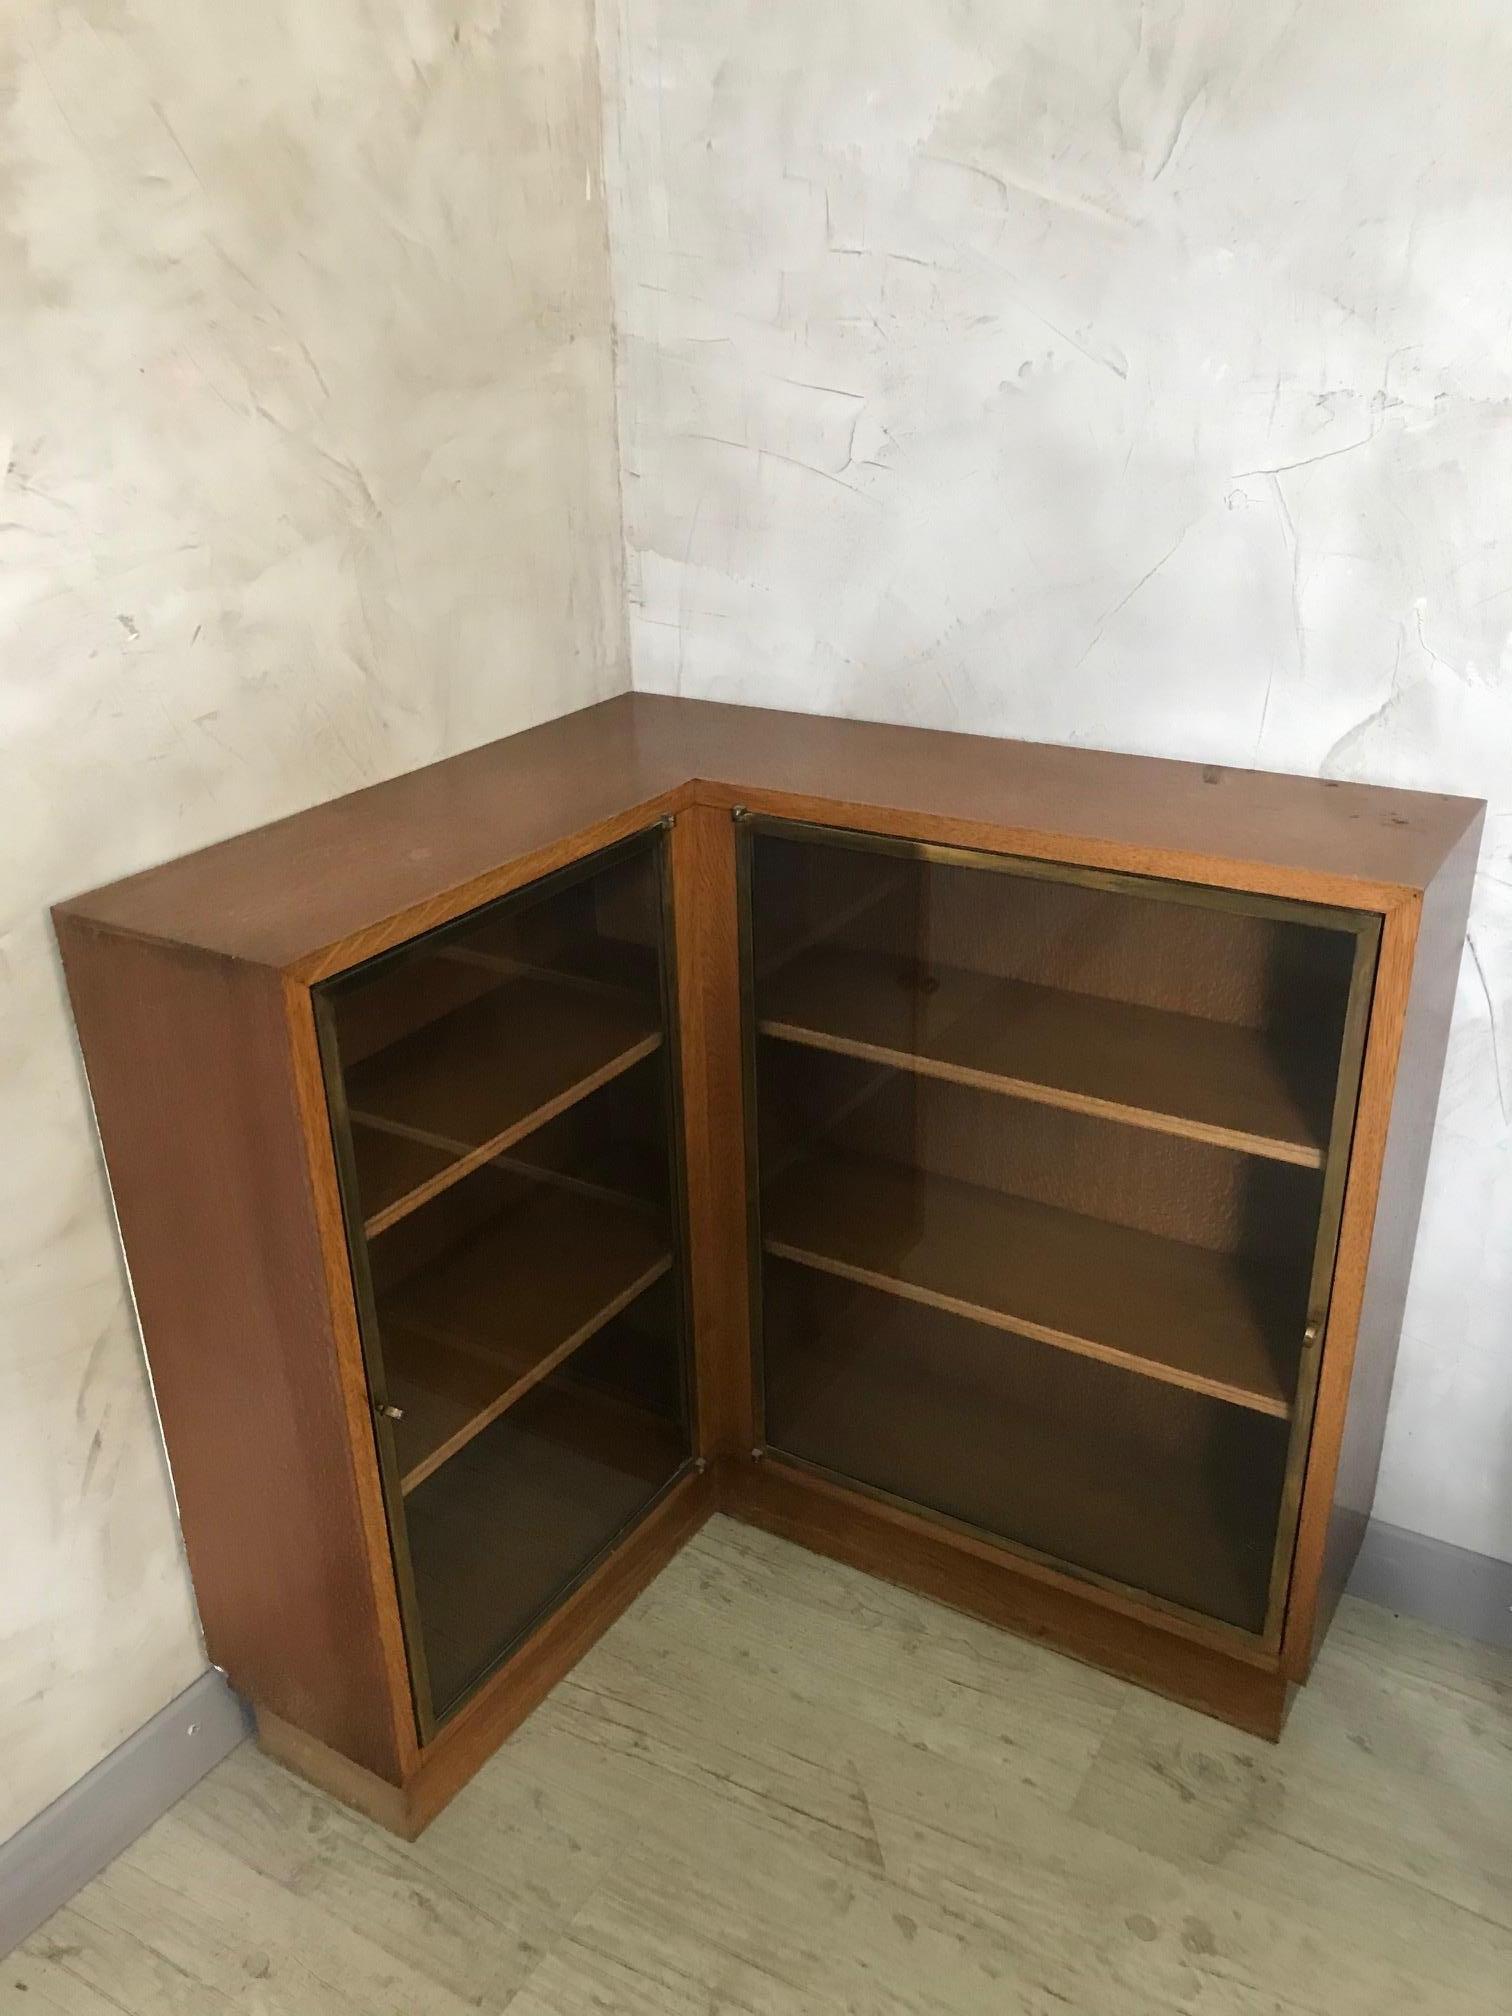 Very nice and rare 20th century French oak and gilted brass vitrine from the 1940s.
Two opening doors with gilted brass sides, and two keys also.
Many shelves on the inside.
Good quality and original.